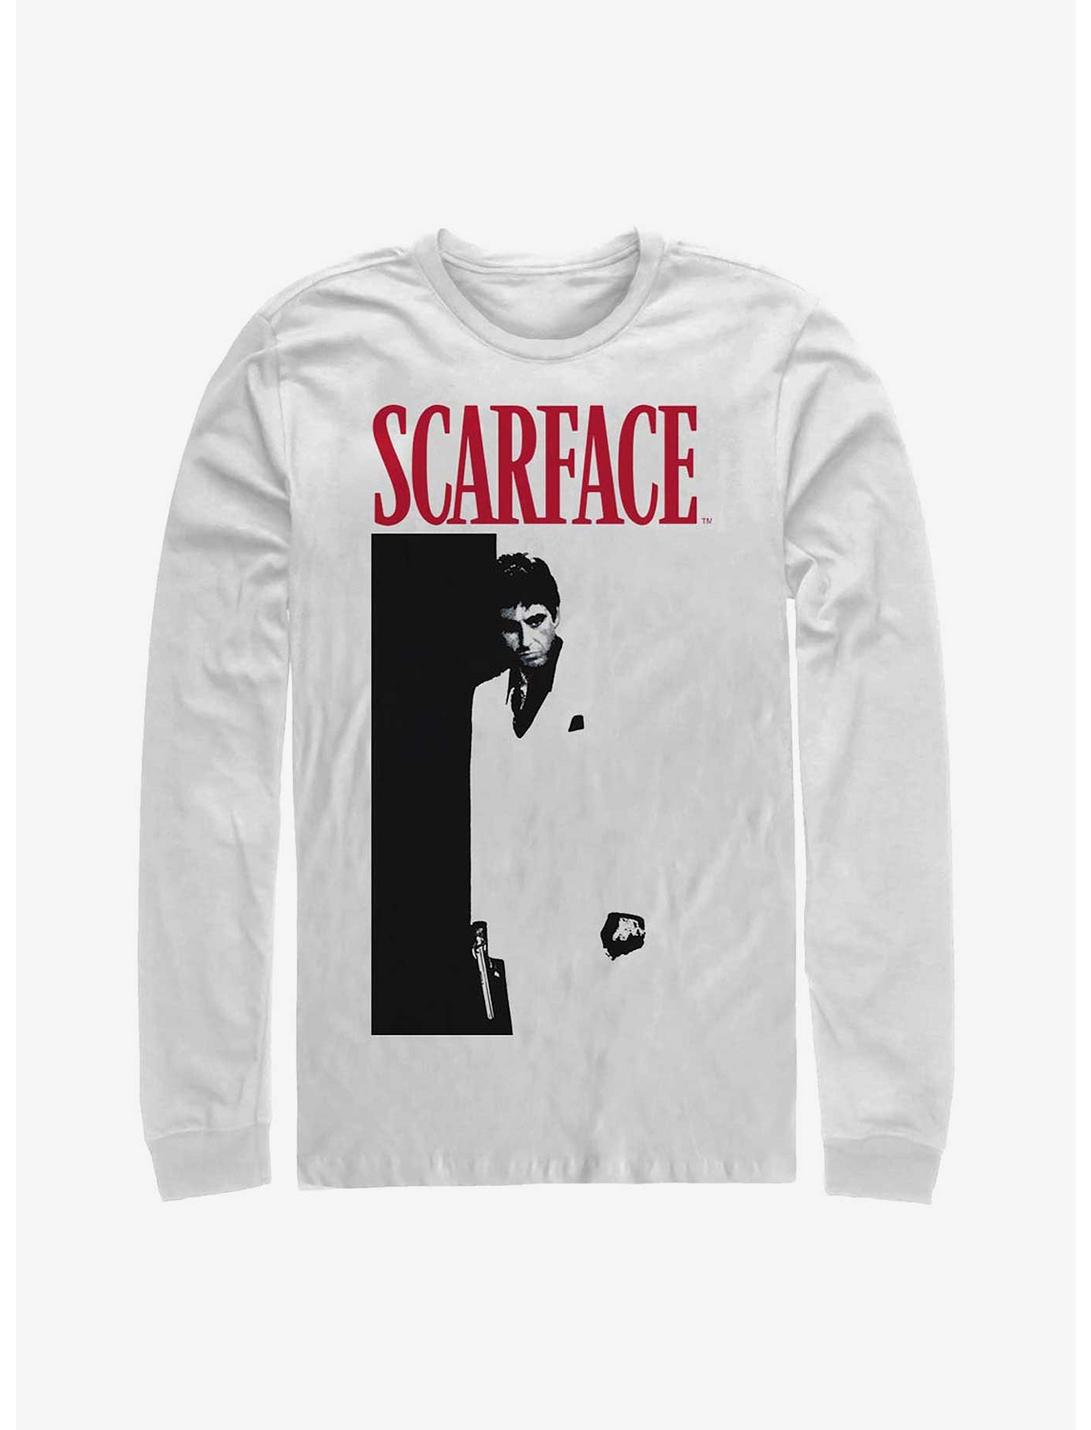 Scarface Poster Long-Sleeve T-Shirt, WHITE, hi-res